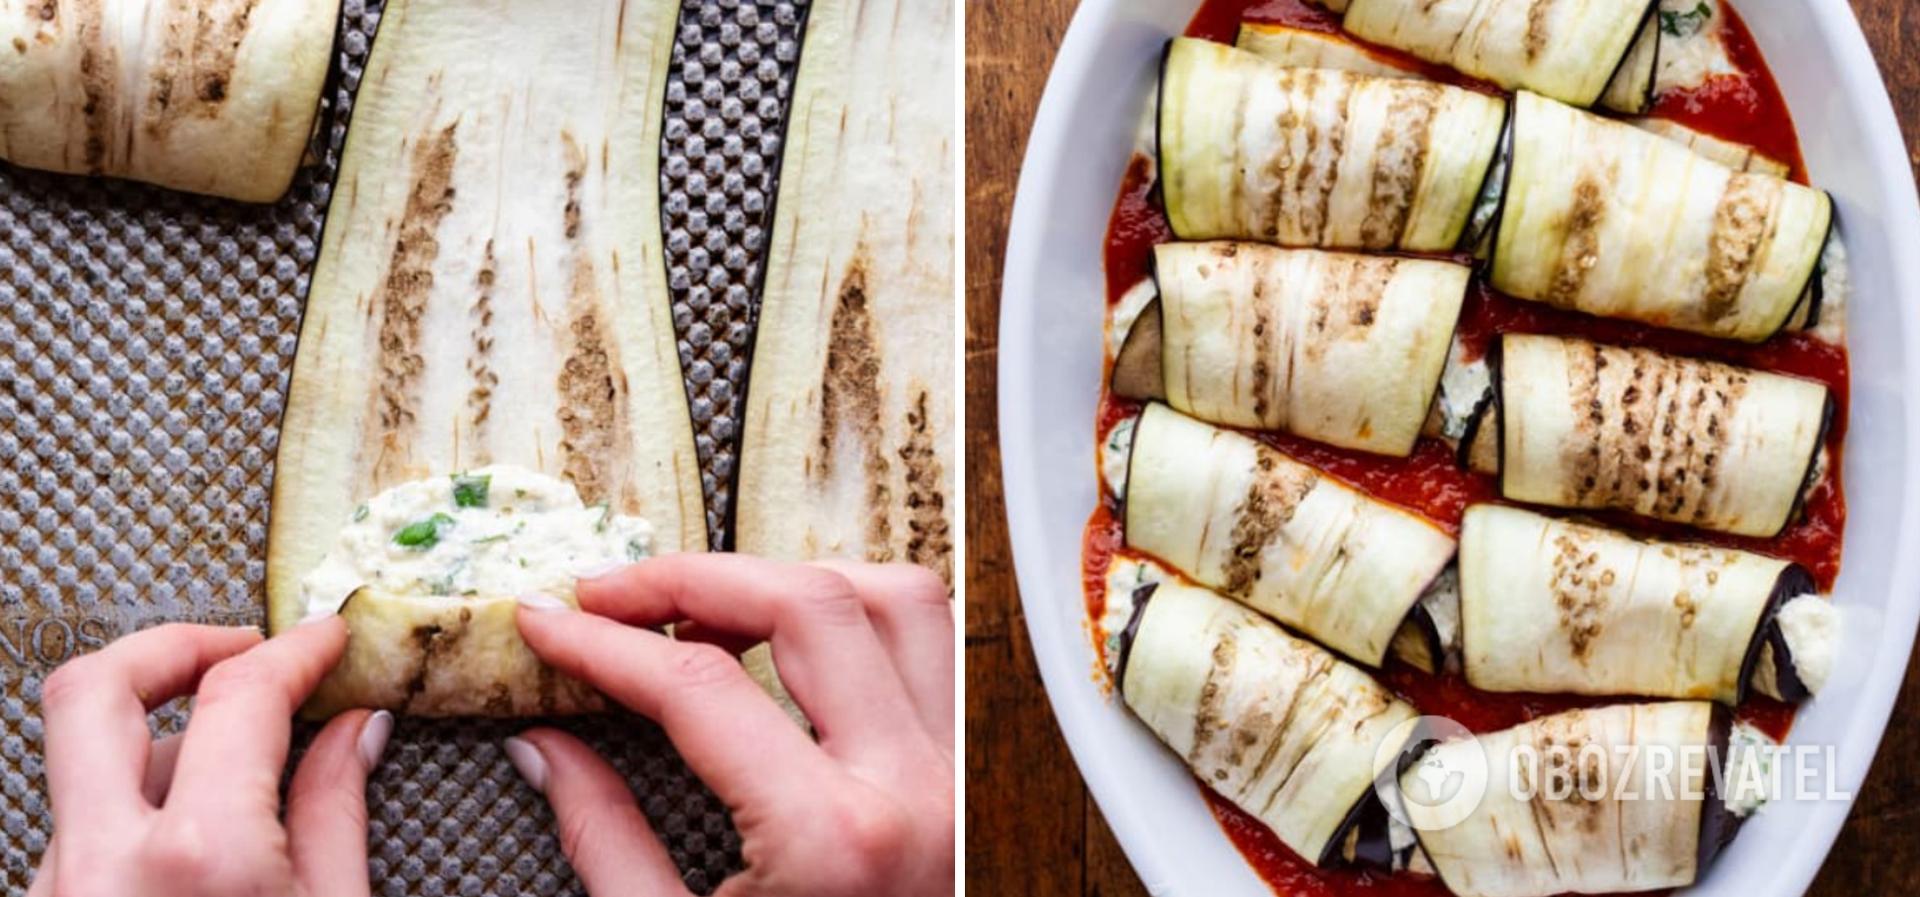 How to prepare an eggplant appetizer